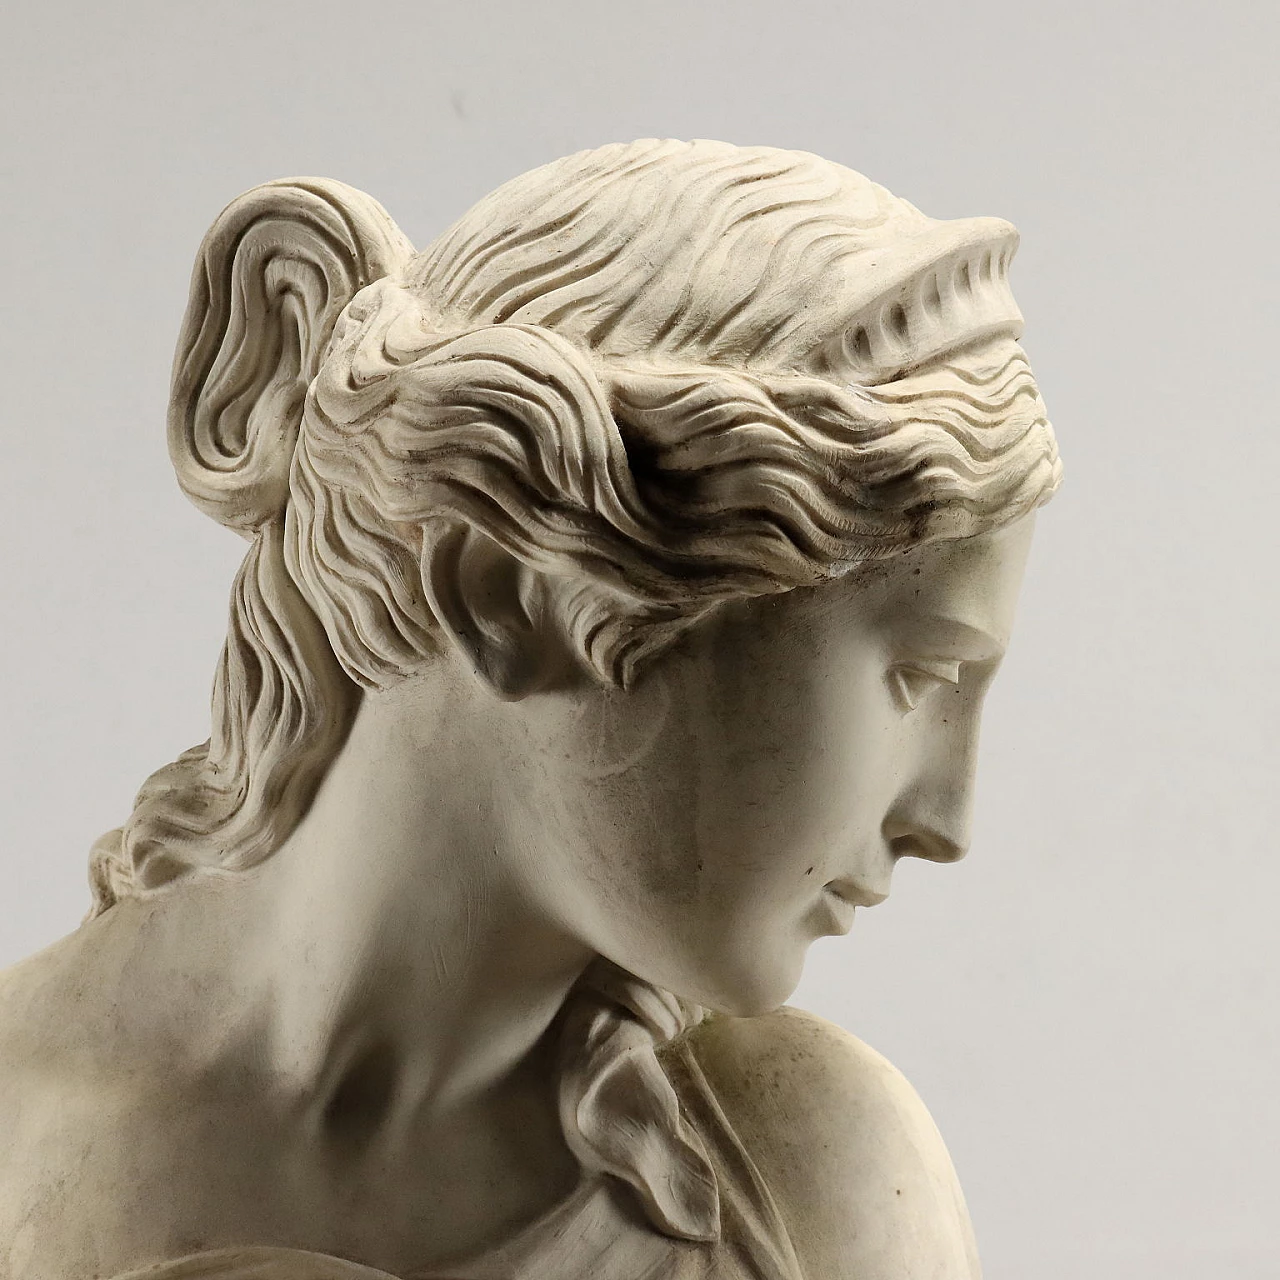 Dal Torrione, Venus at the spring, synthetic marble sculpture 4